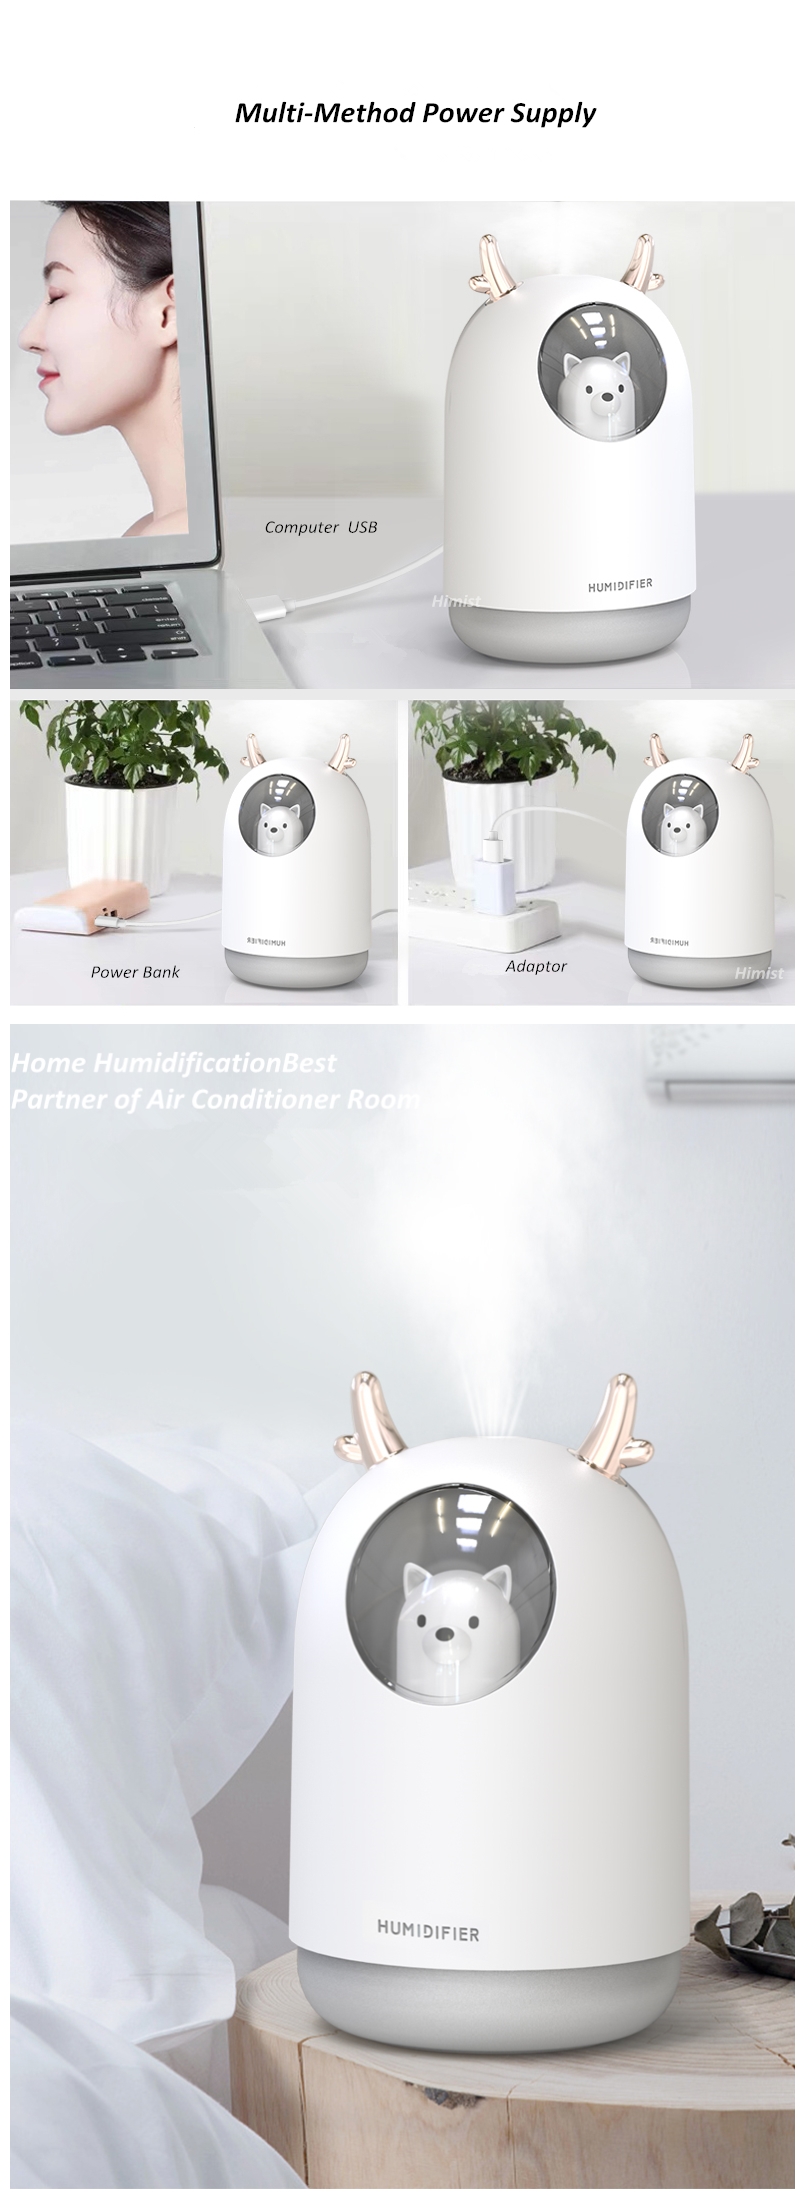 300ML-Ultrasonic-Air-Humidifier-Aroma-Essential-Oil-Diffuser-for-Home-Car-USB-Fogger-Mist-Maker-with-1563517-5